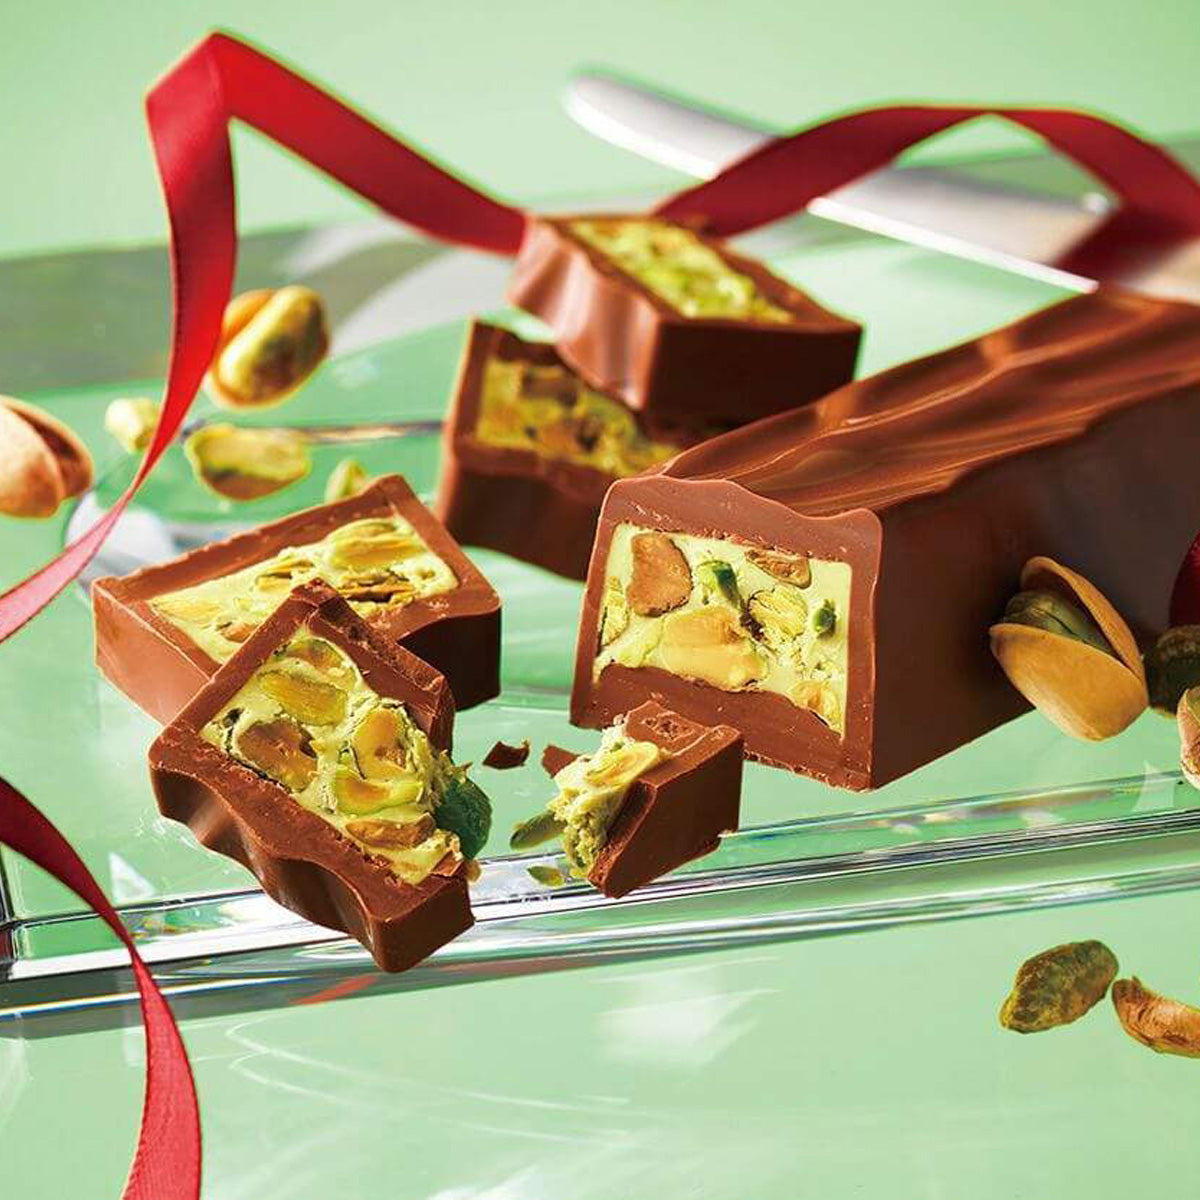 ROYCE' Chocolate - Pistache Chocolat - Image shows a brown chocolate loaf and slices filled with pistachios and green cream. Accents include a clear tray and red ribbon. Background is green.